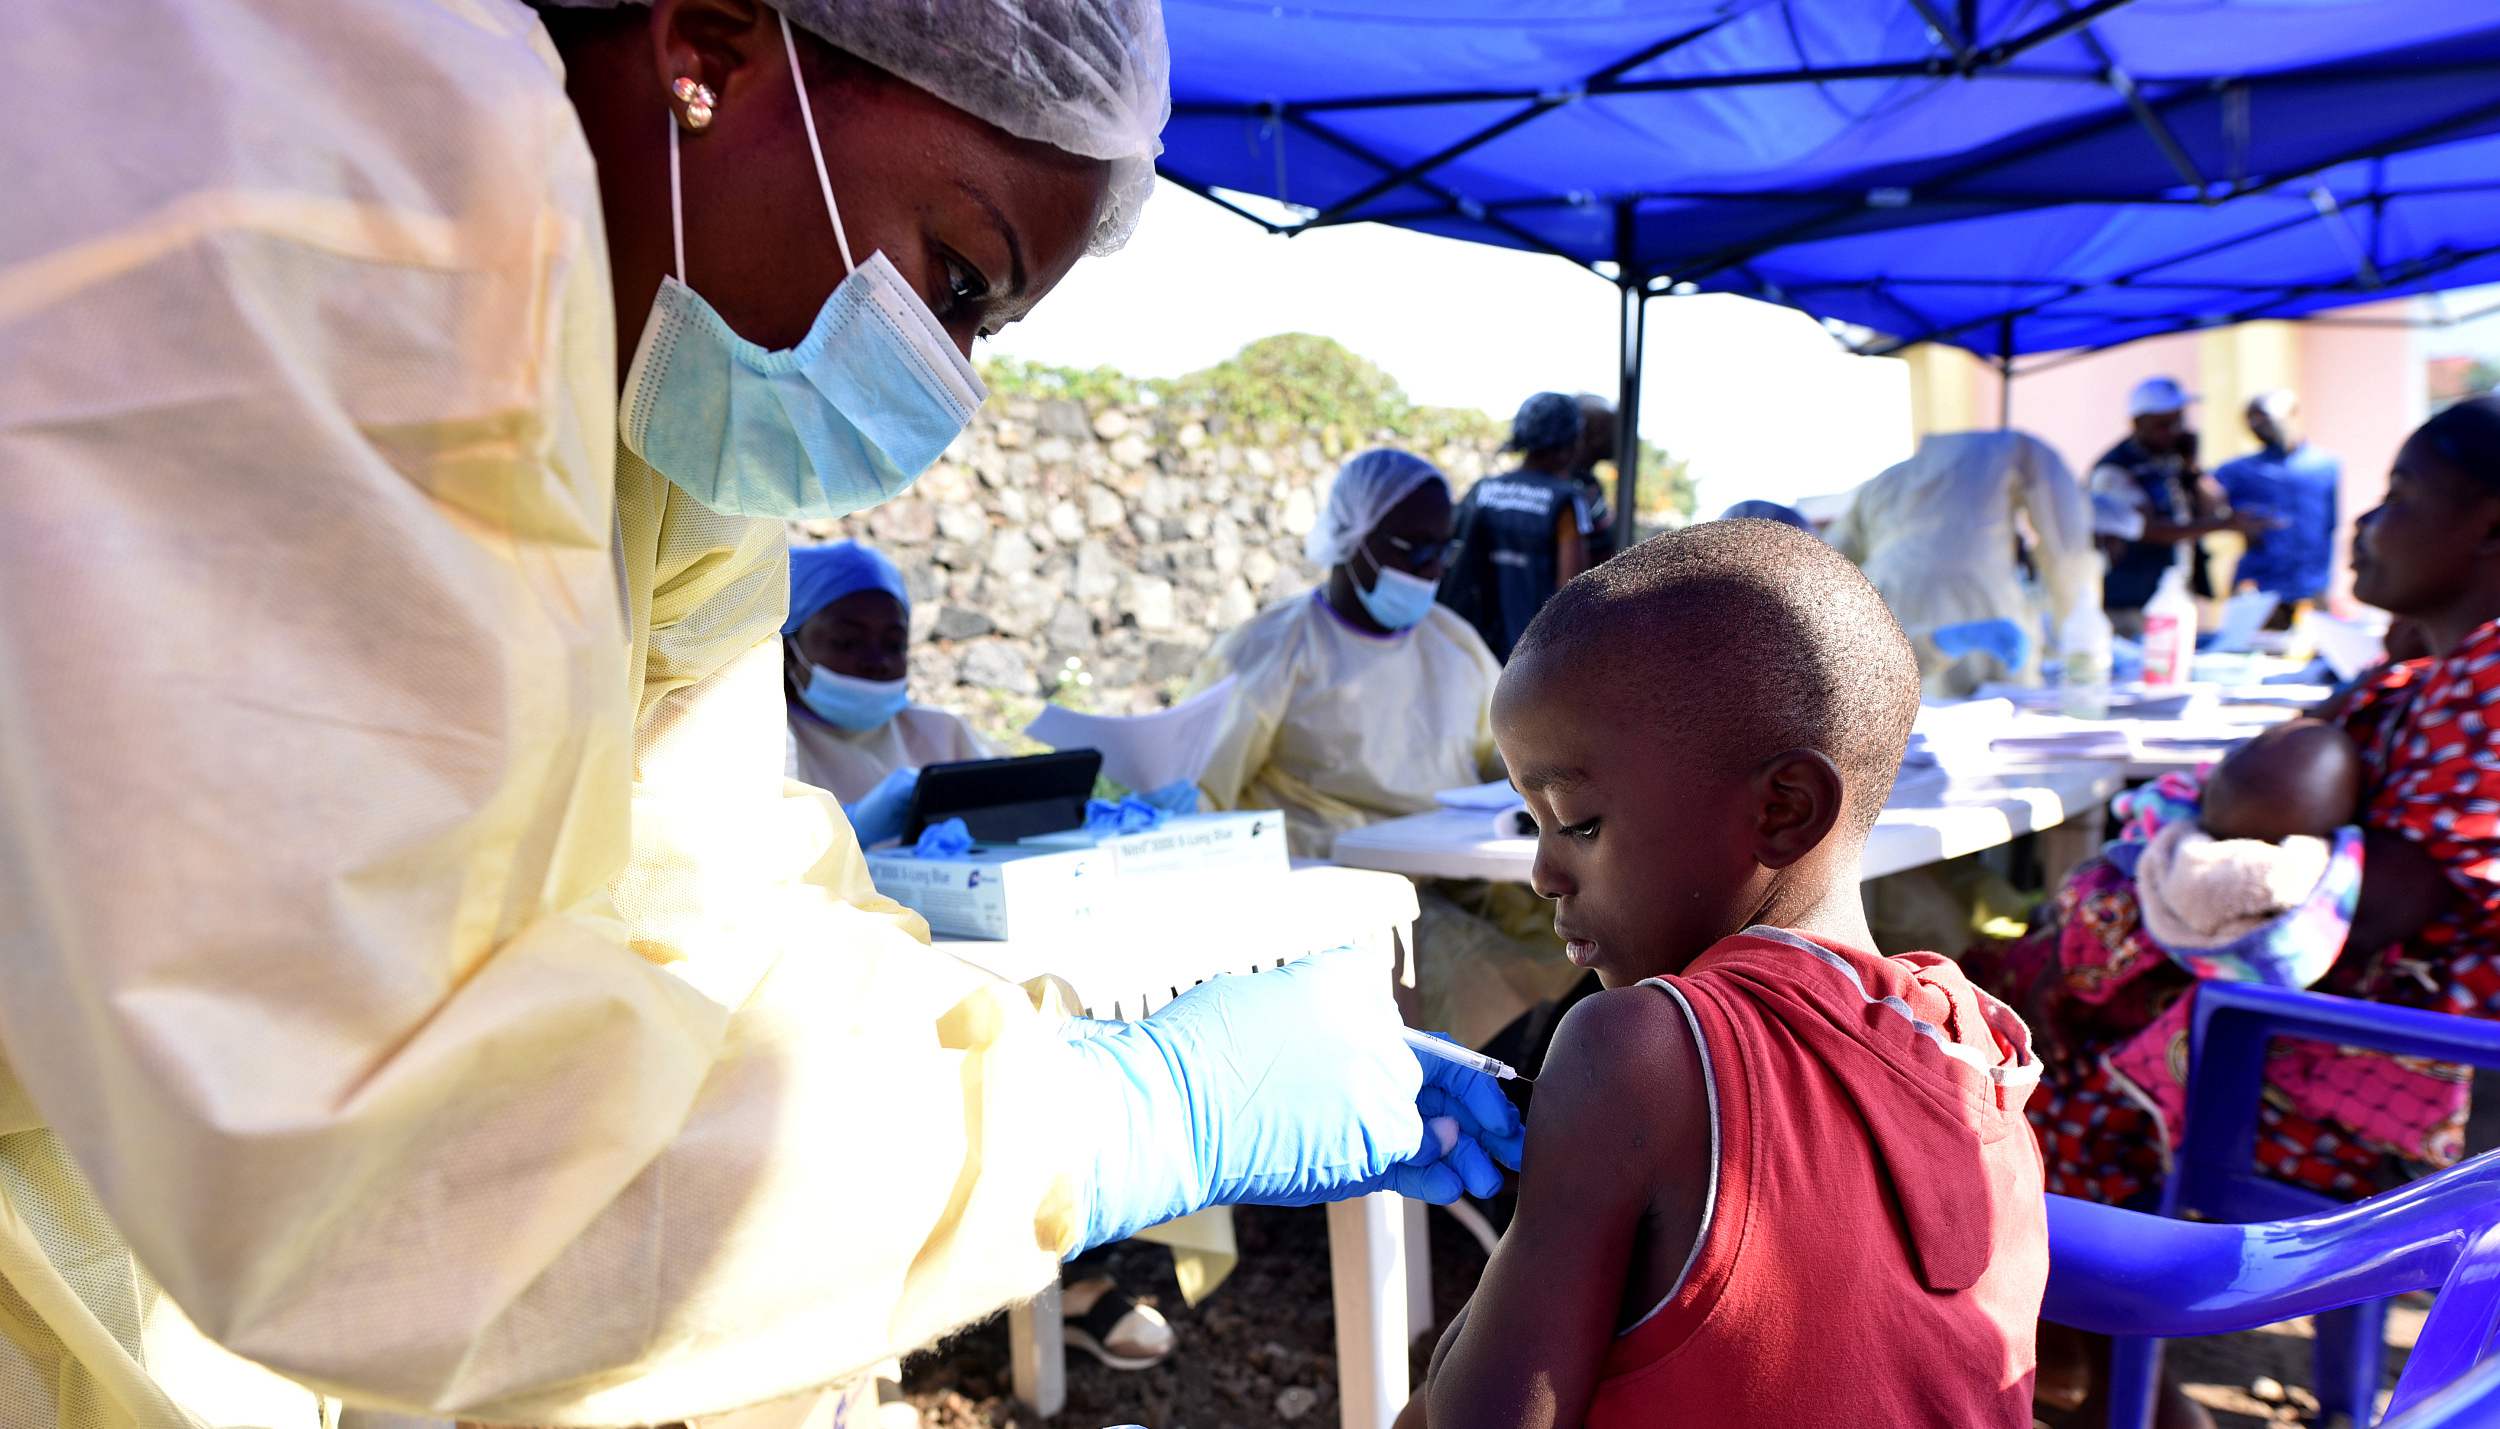 Ebola Outbreak: WHO Pleads for Health Care Workers in West Africa | TIME